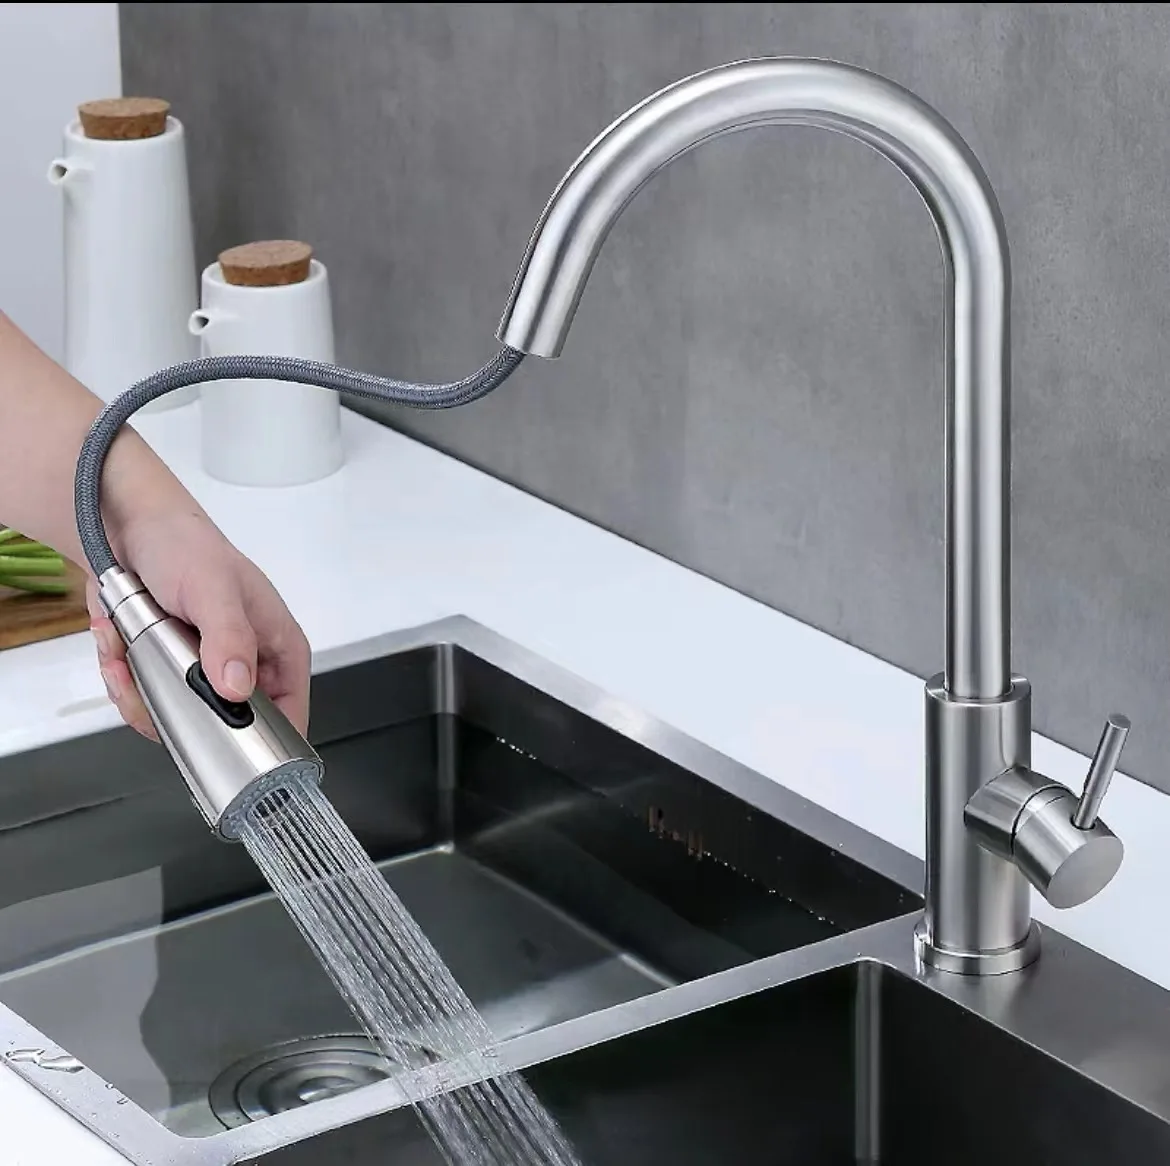 

Hot and cold faucet single hole pull-out kitchen sink mixer faucet water jet mixer deck mounted Brushed Nickel Kitchen Faucet